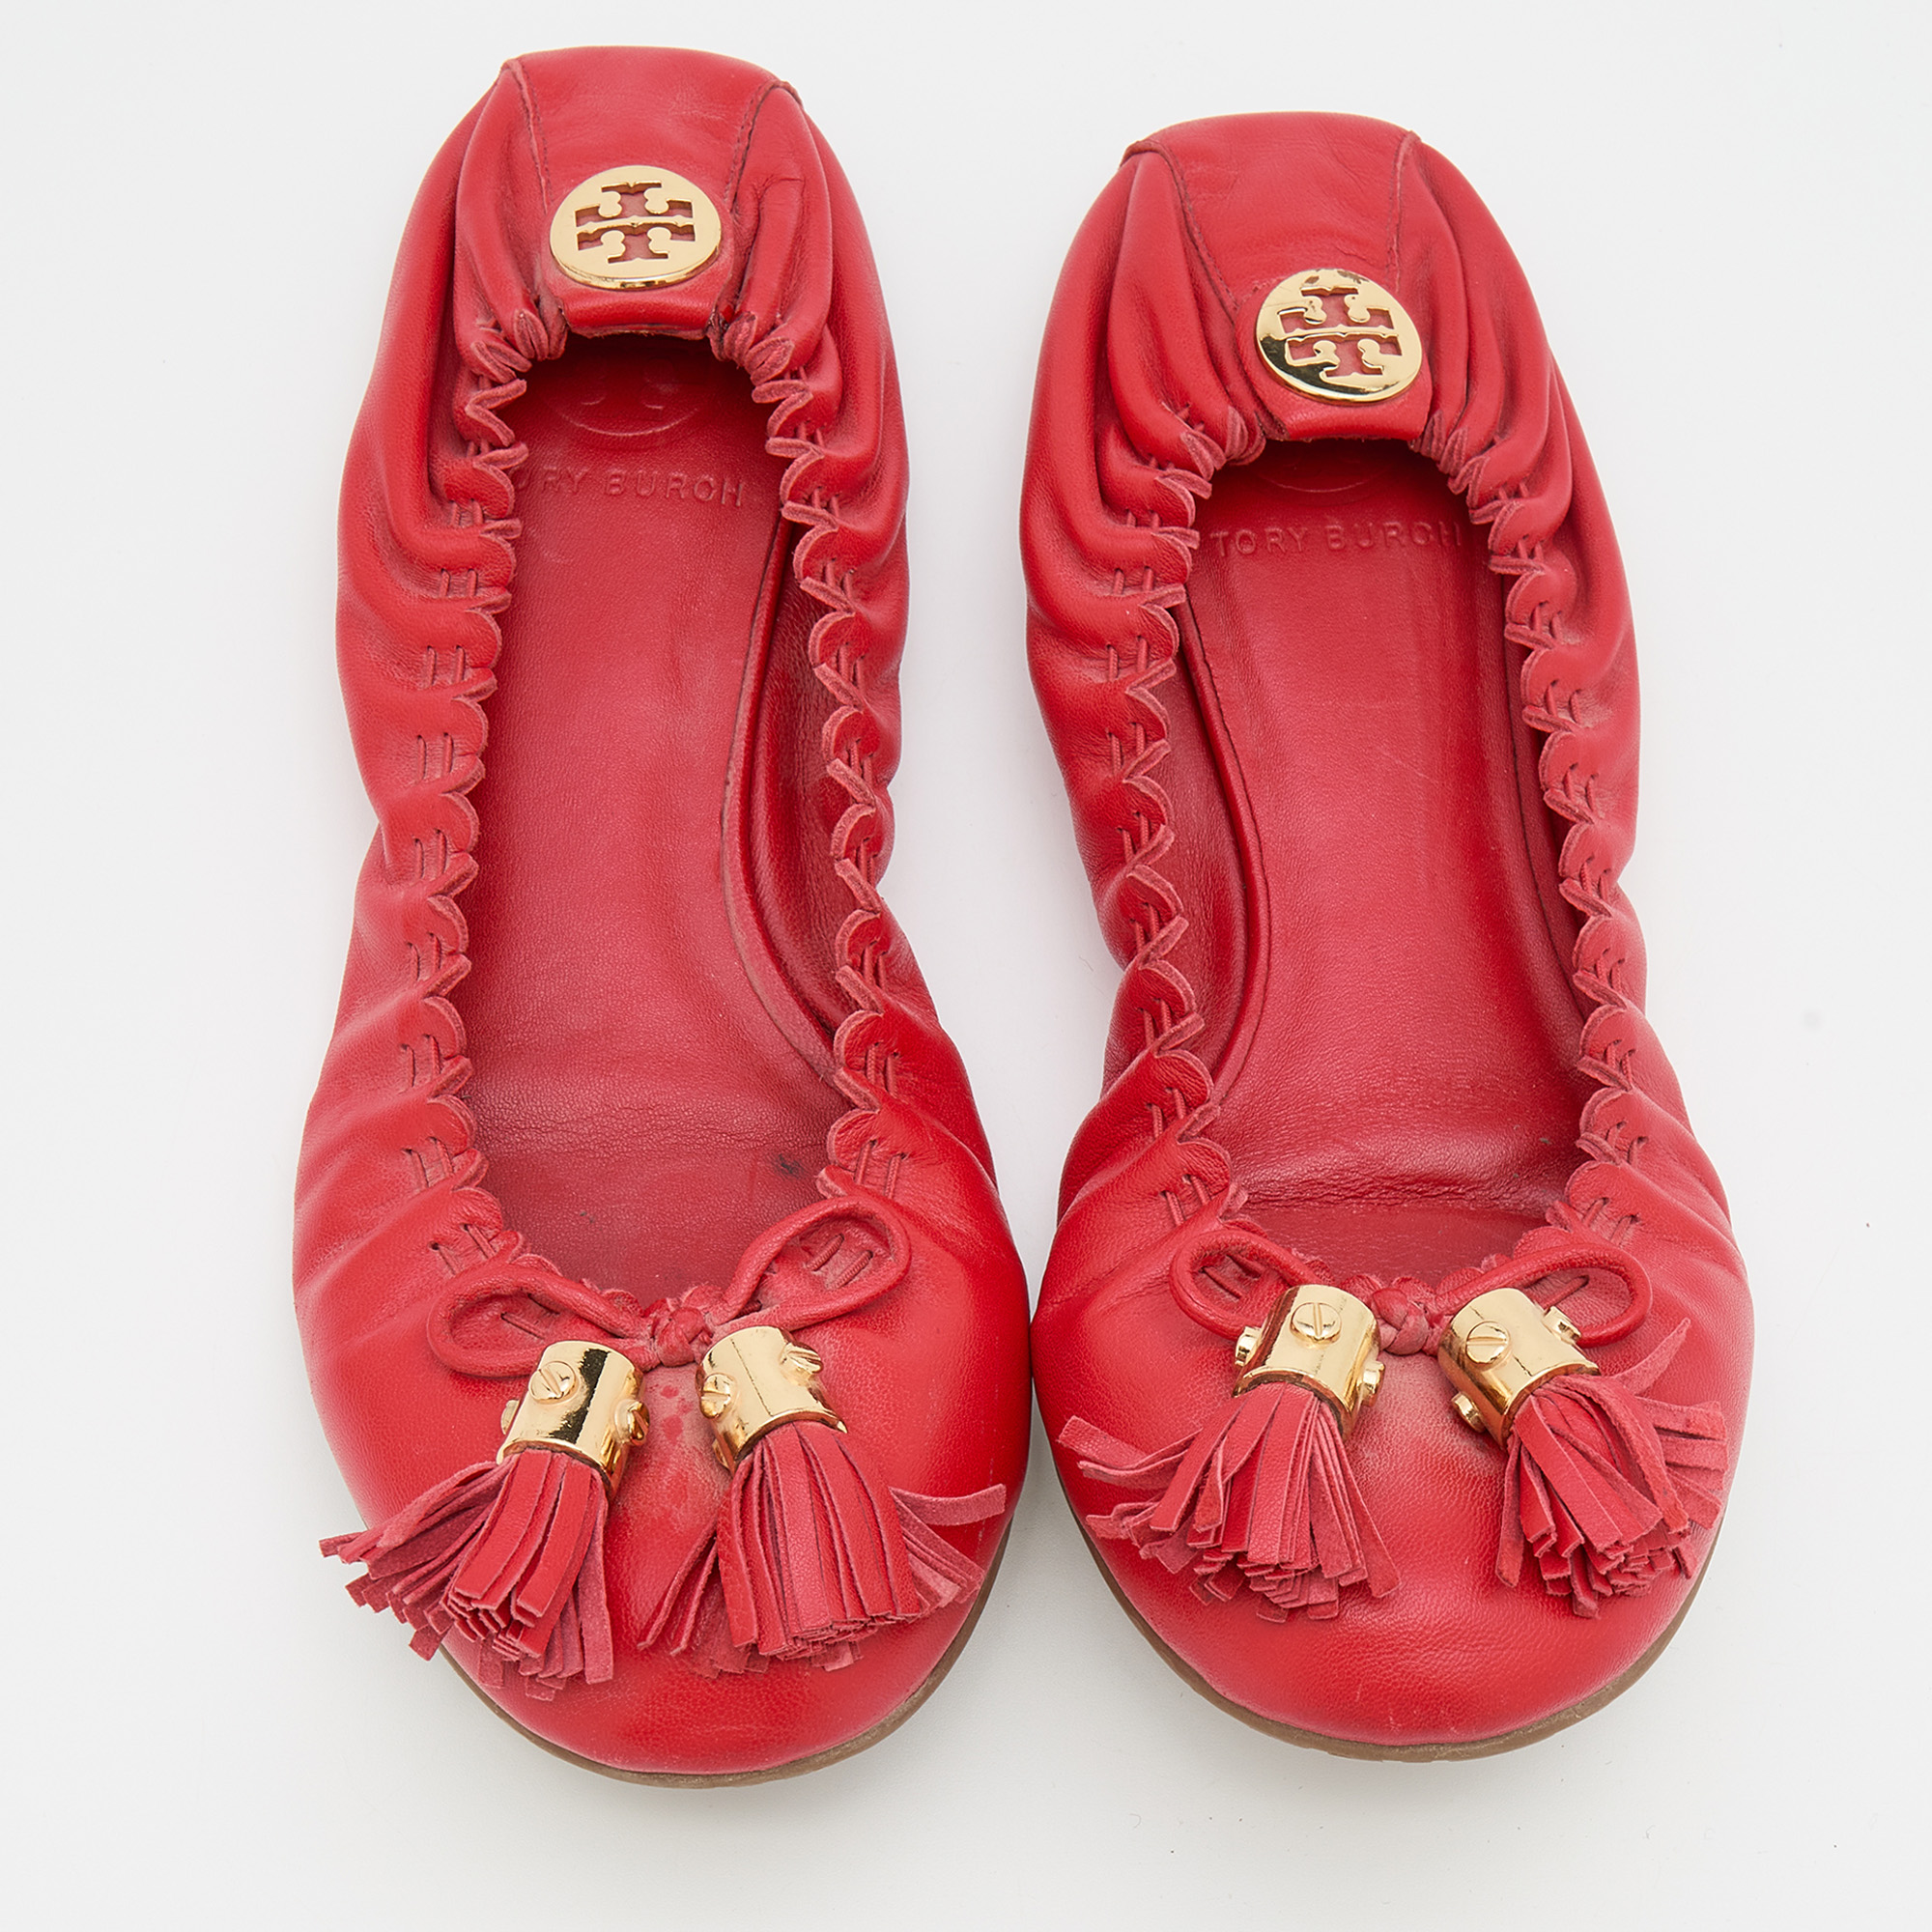 Tory Burch Red Leather Reese Tassel Scrunch Ballet Flats Size 38